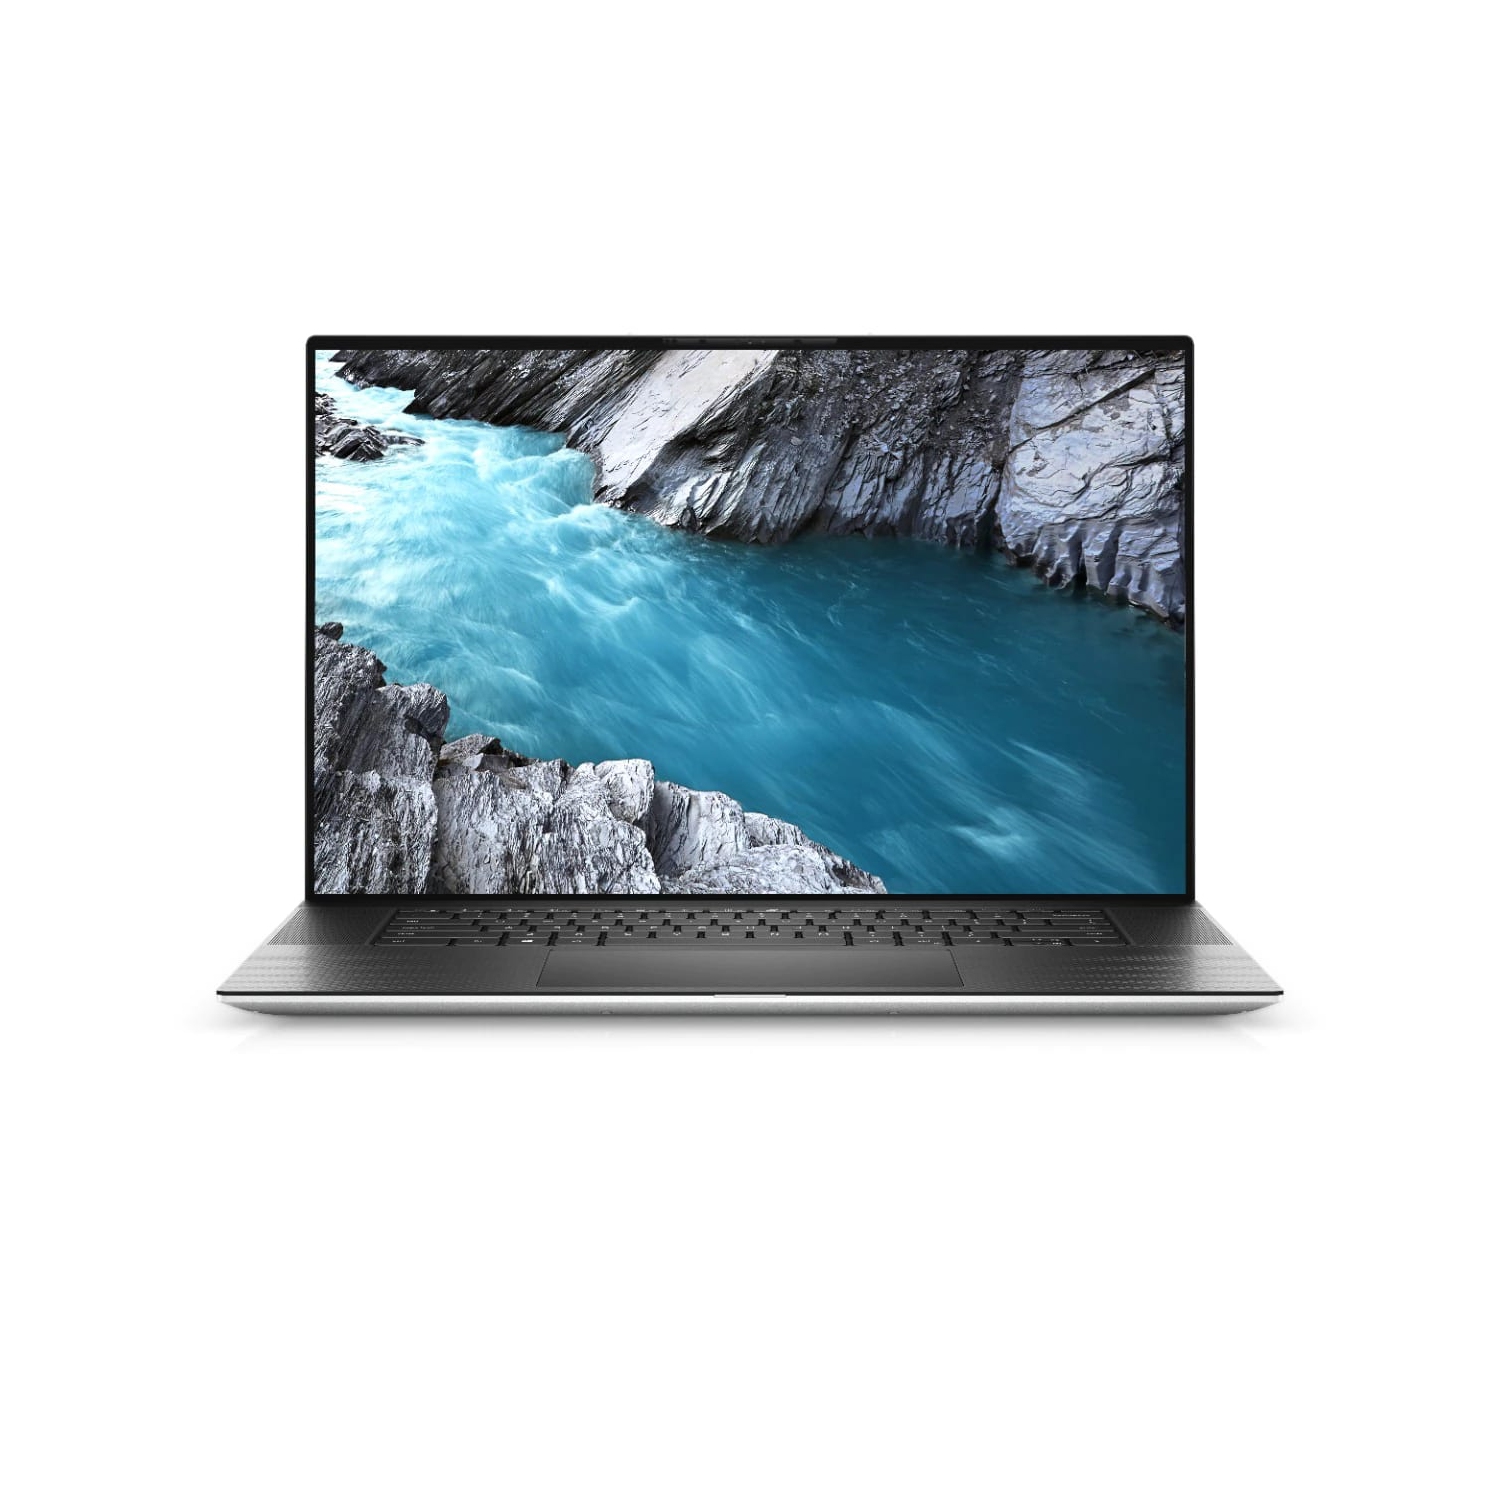 Refurbished (Excellent) - Dell XPS 17 9700 Laptop (2020), 17" 4K Touch, Core i7 - 512GB SSD - 16GB RAM - RTX 2060, 8 Cores @ 5.1 GHz - 10th Gen CPU Certified Refurbished